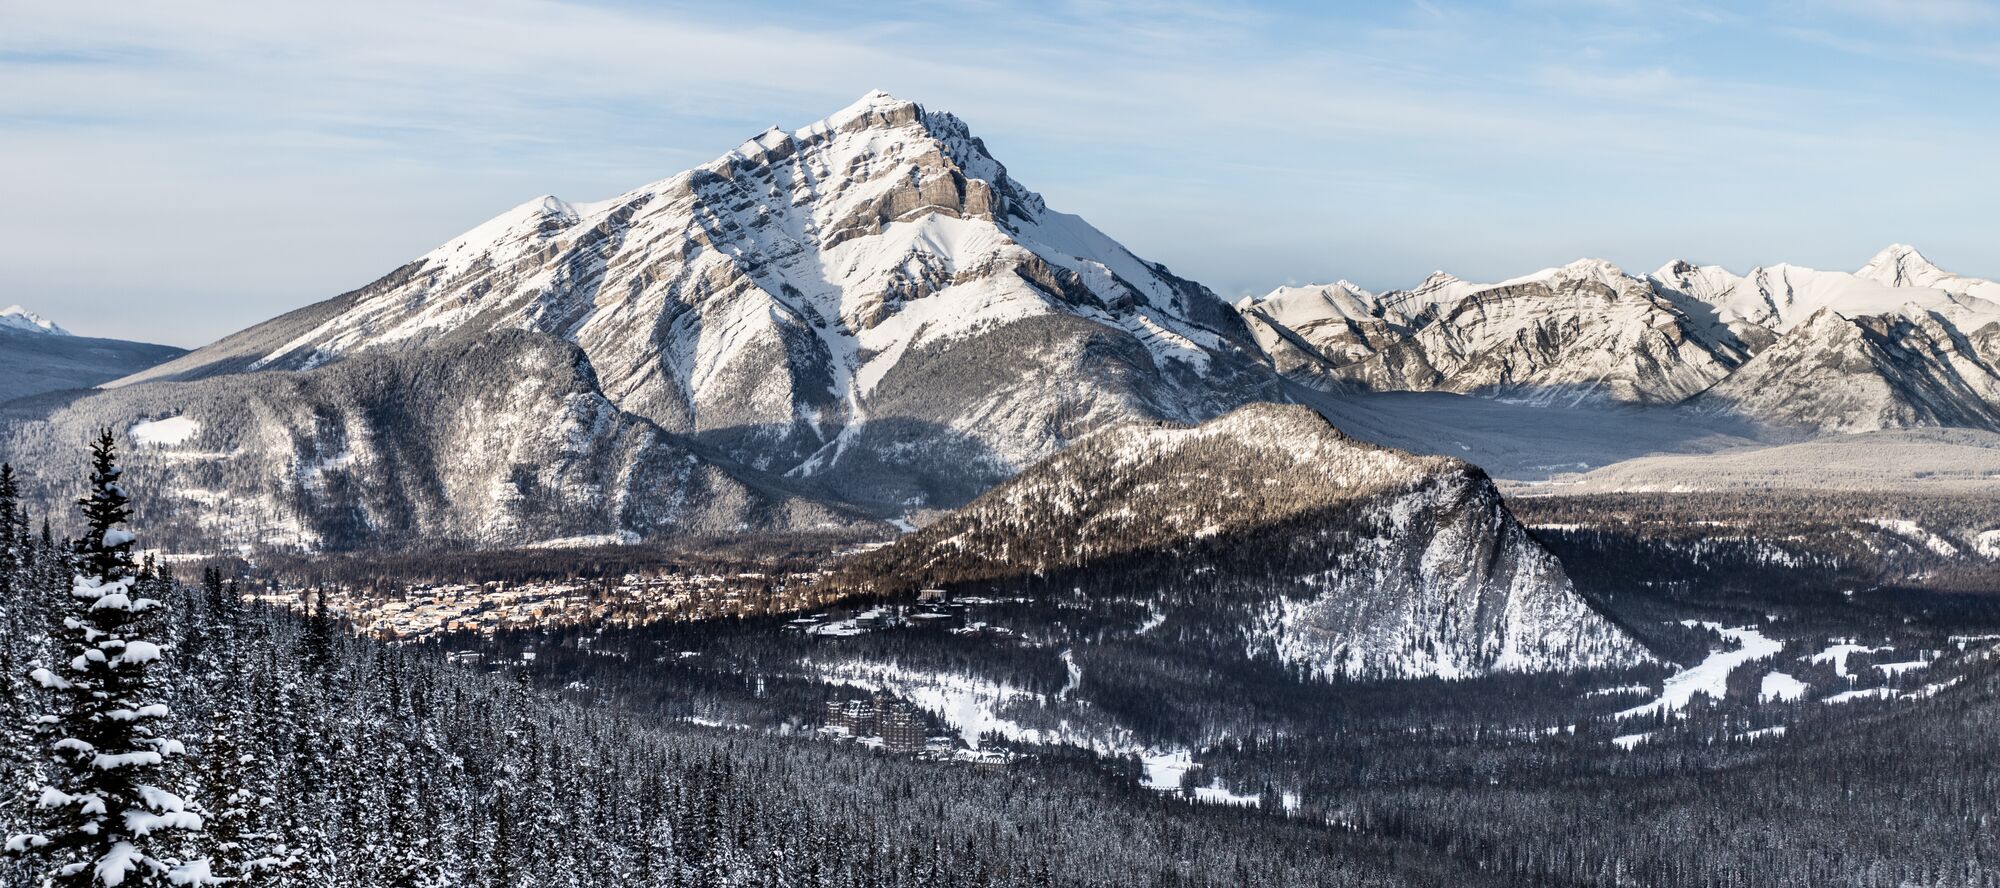 An aerial view of the town of Banff in winter taken from the top of the Banff Gondola on Sulphur Mountain